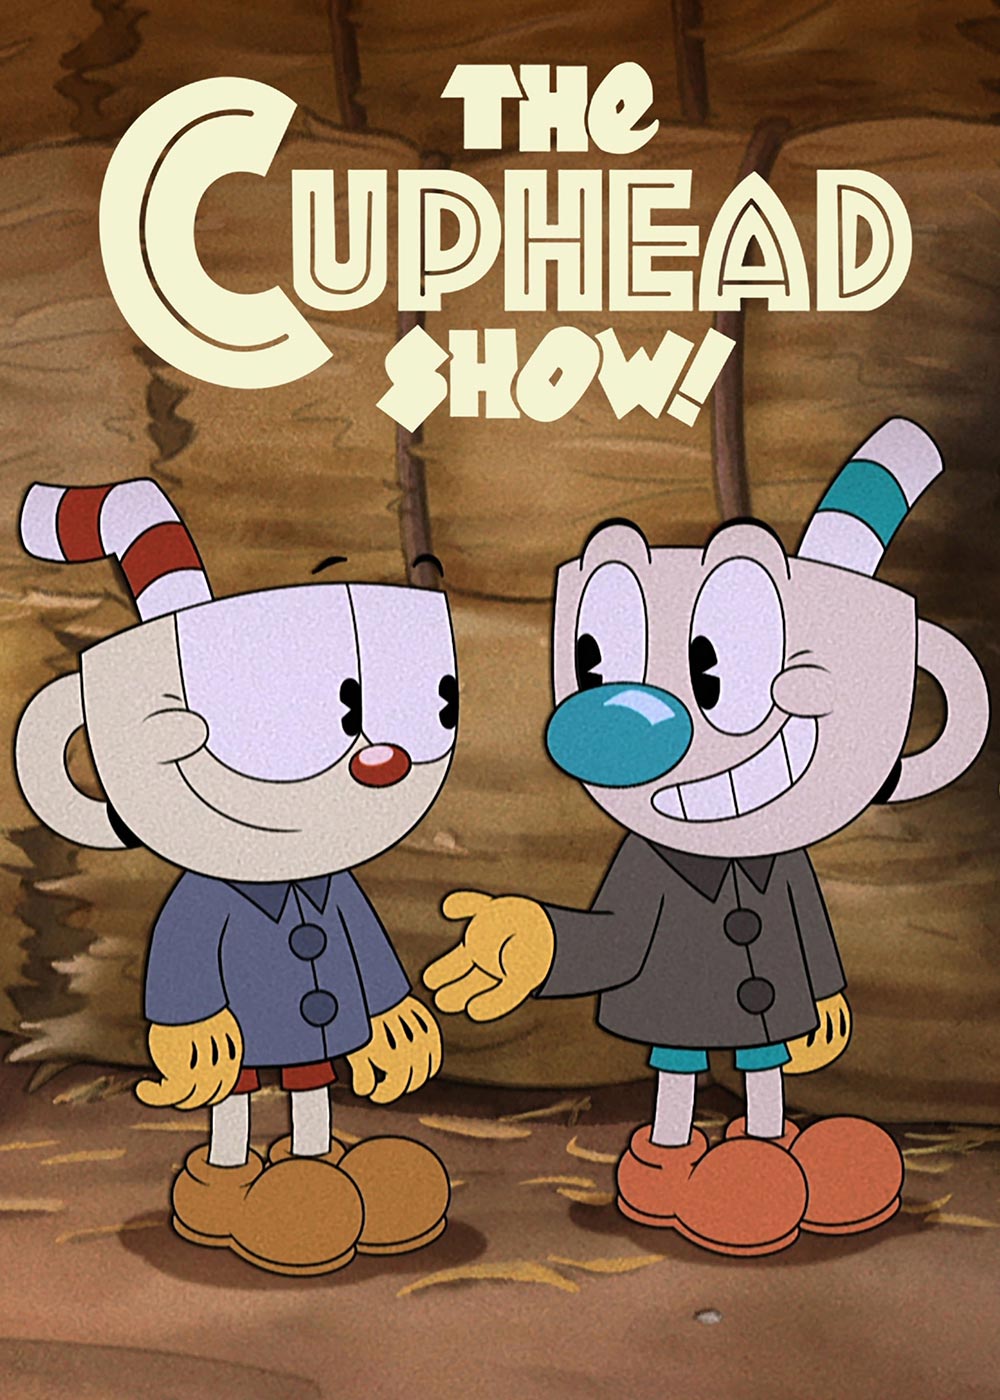 Kennedy Tarrell on X: My last day on the Cuphead show was this